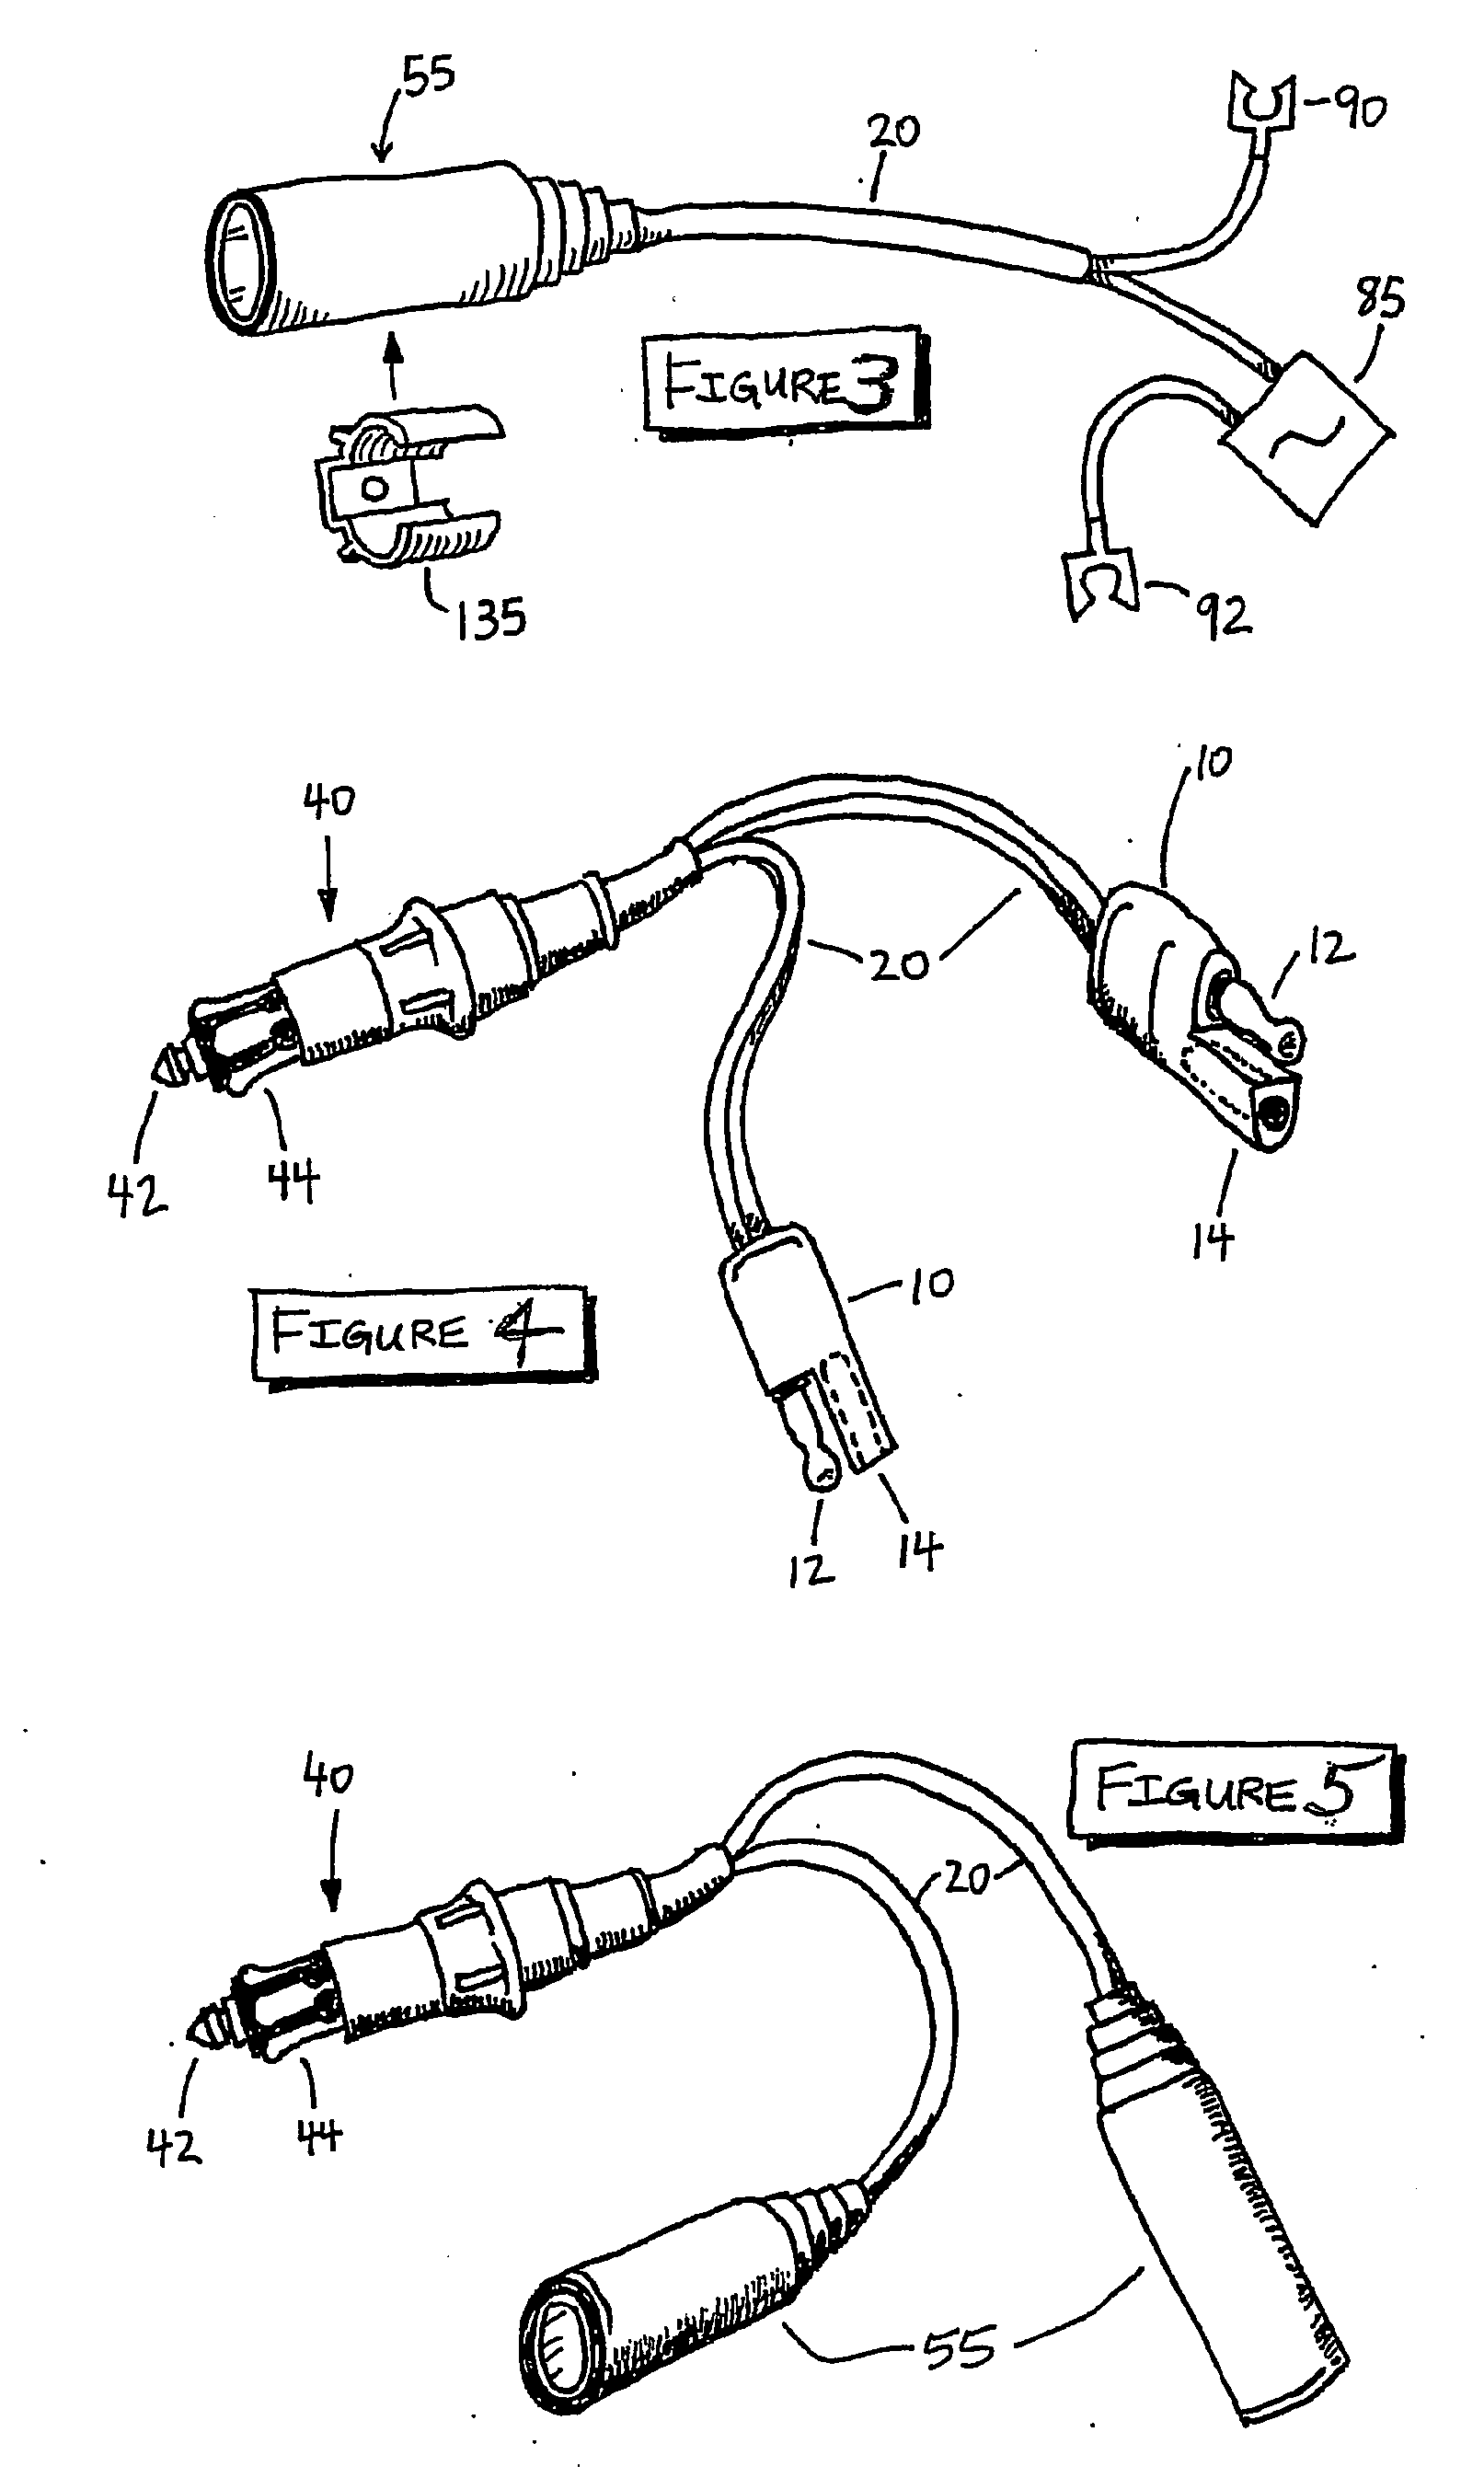 Vehicle Accessory Power Connector